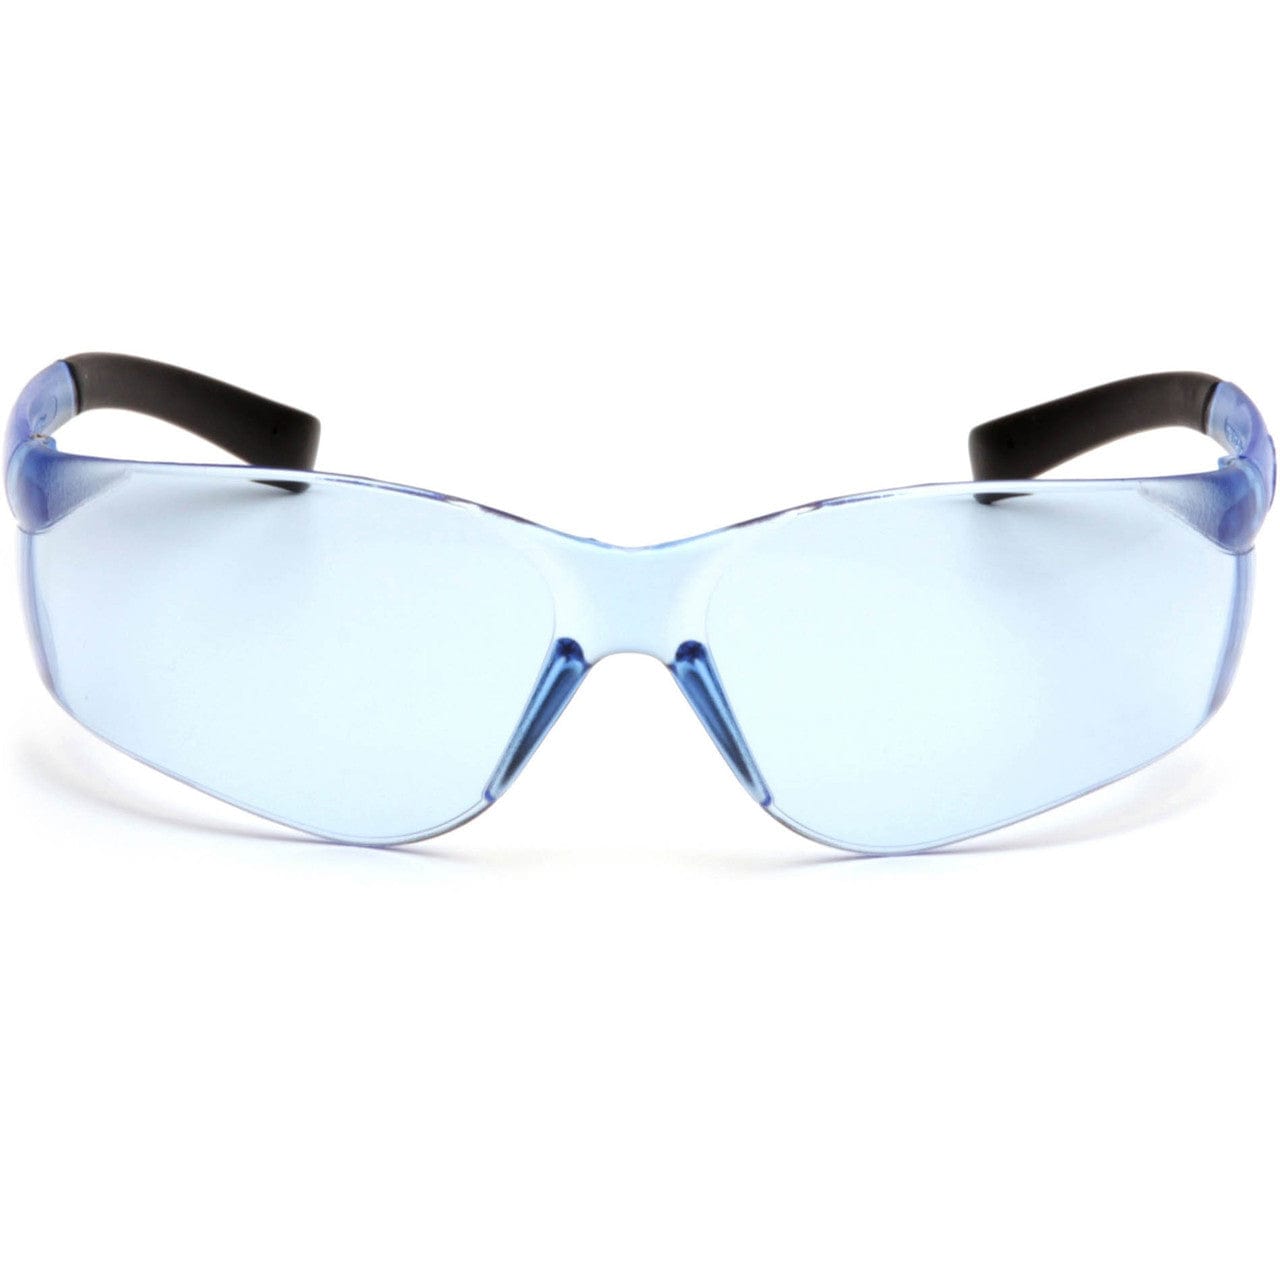 Pyramex Mini Ztek Safety Glasses with Infinity Blue Lens S2560SN Front View